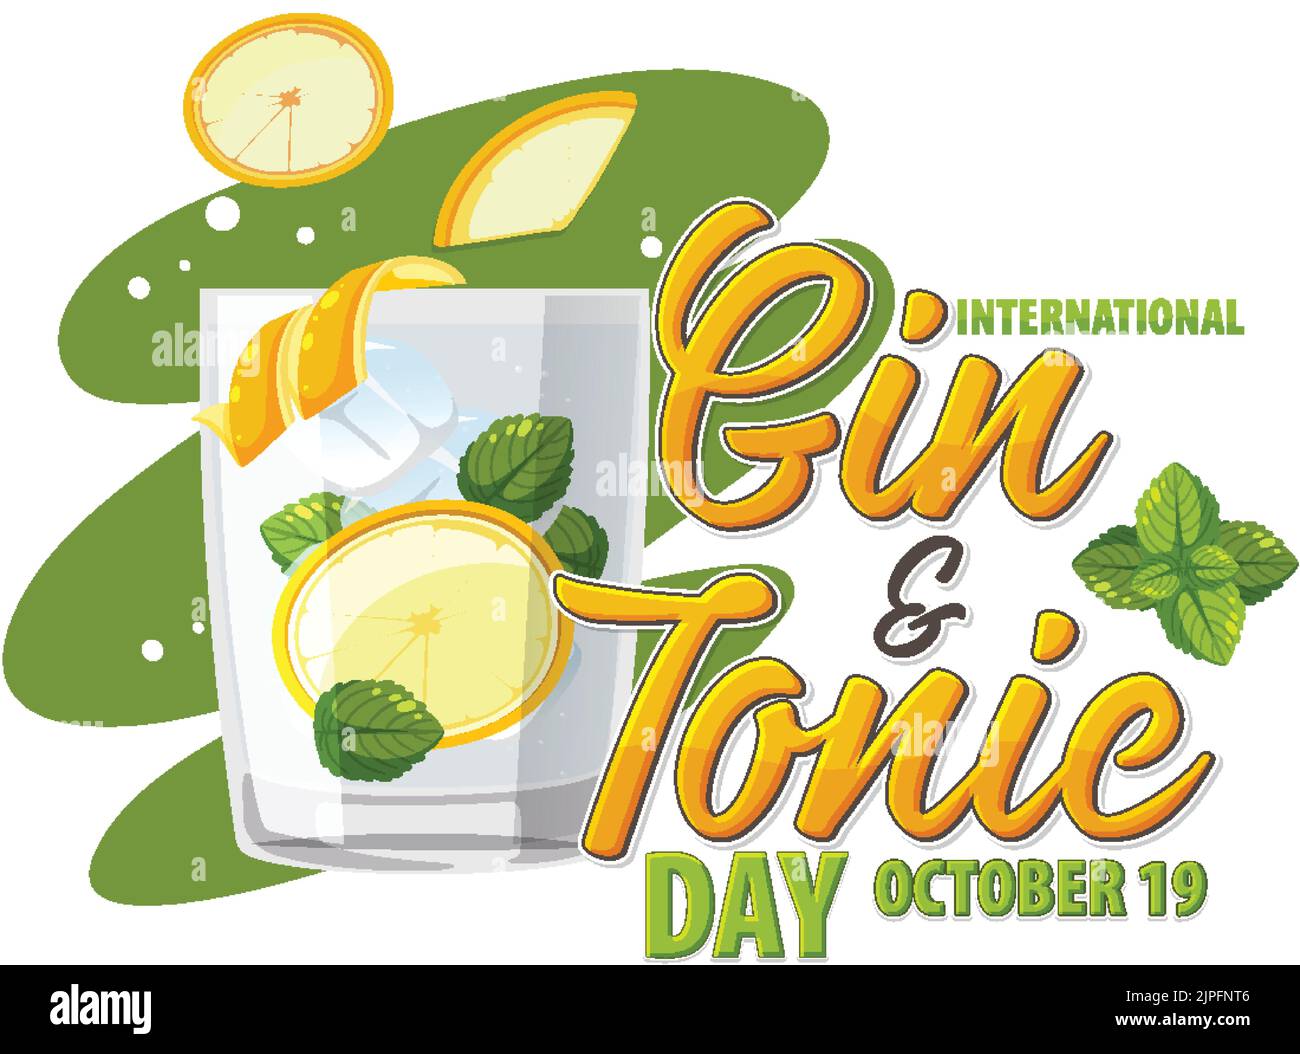 International Gin And Tonic Day Banner Design illustration Stock Vector